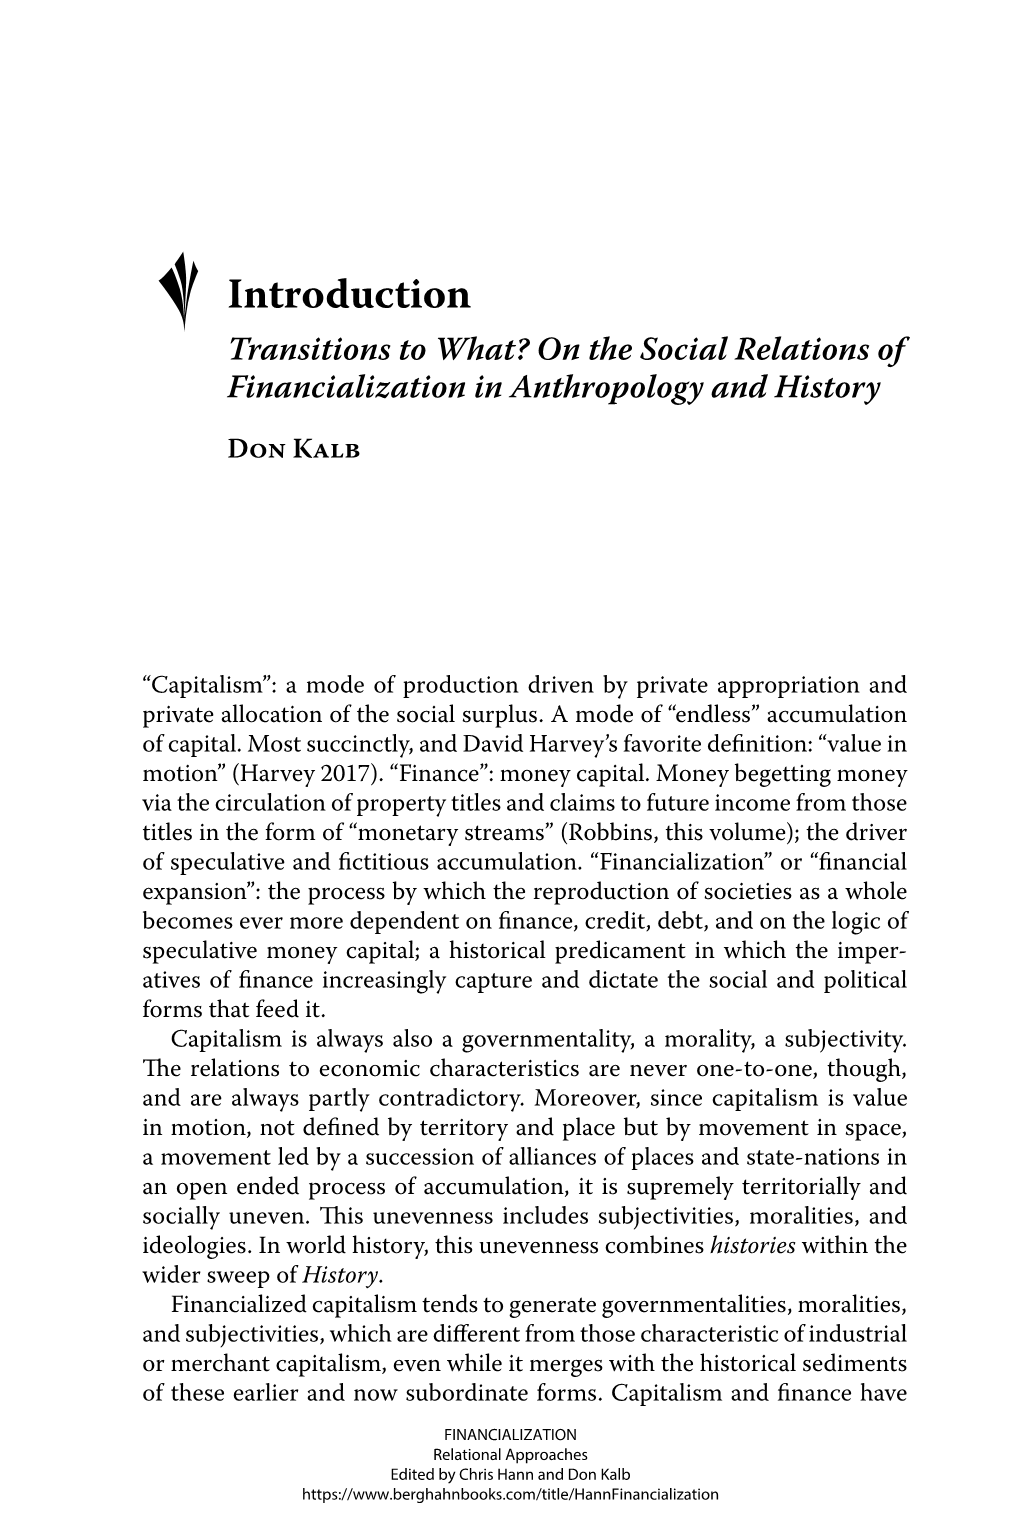 ° Introduction Transitions to What? on the Social Relations of Financialization in Anthropology and History